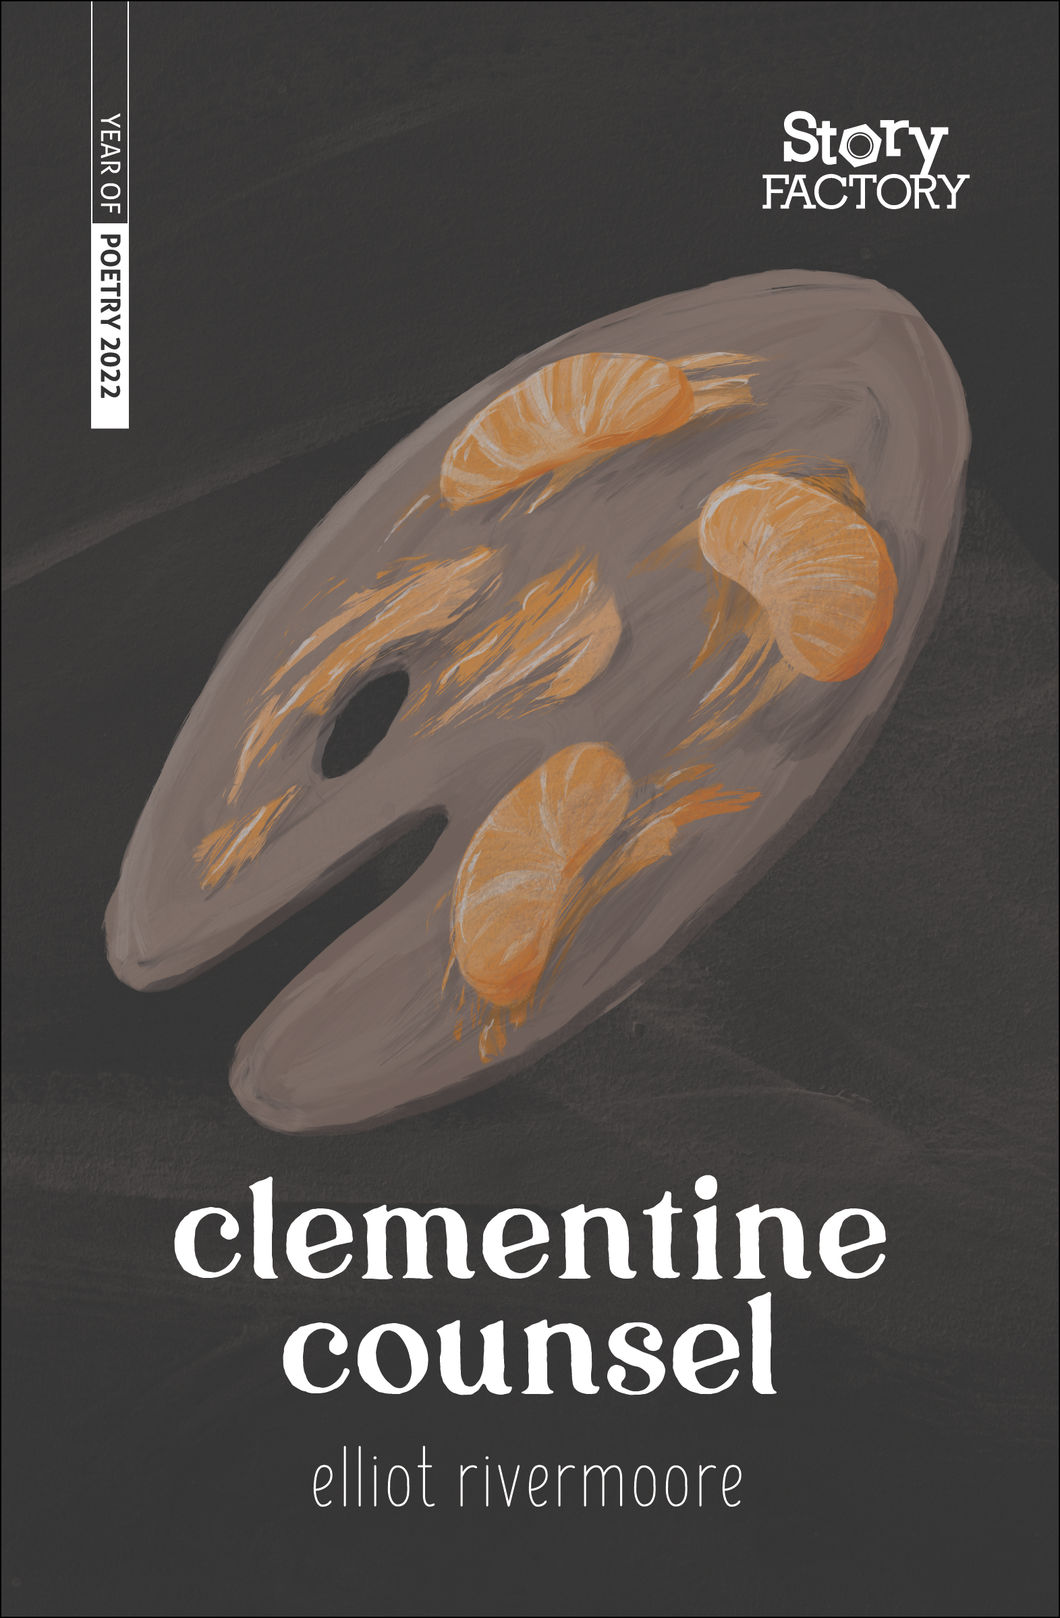 clementine counsel by Elliot rivermoore